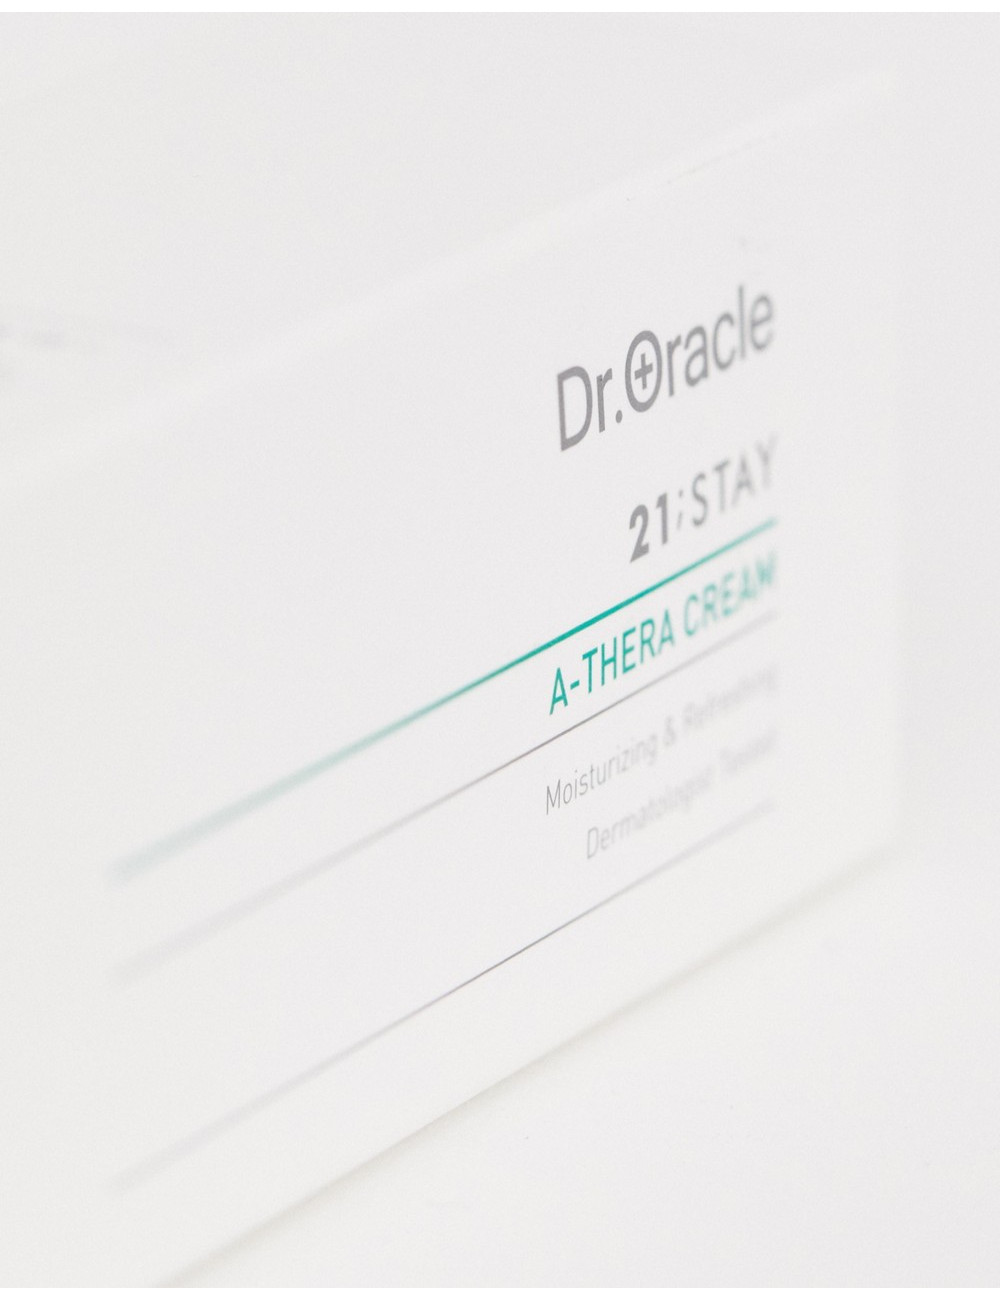 Dr.Oracle 21STAY A-Thera...